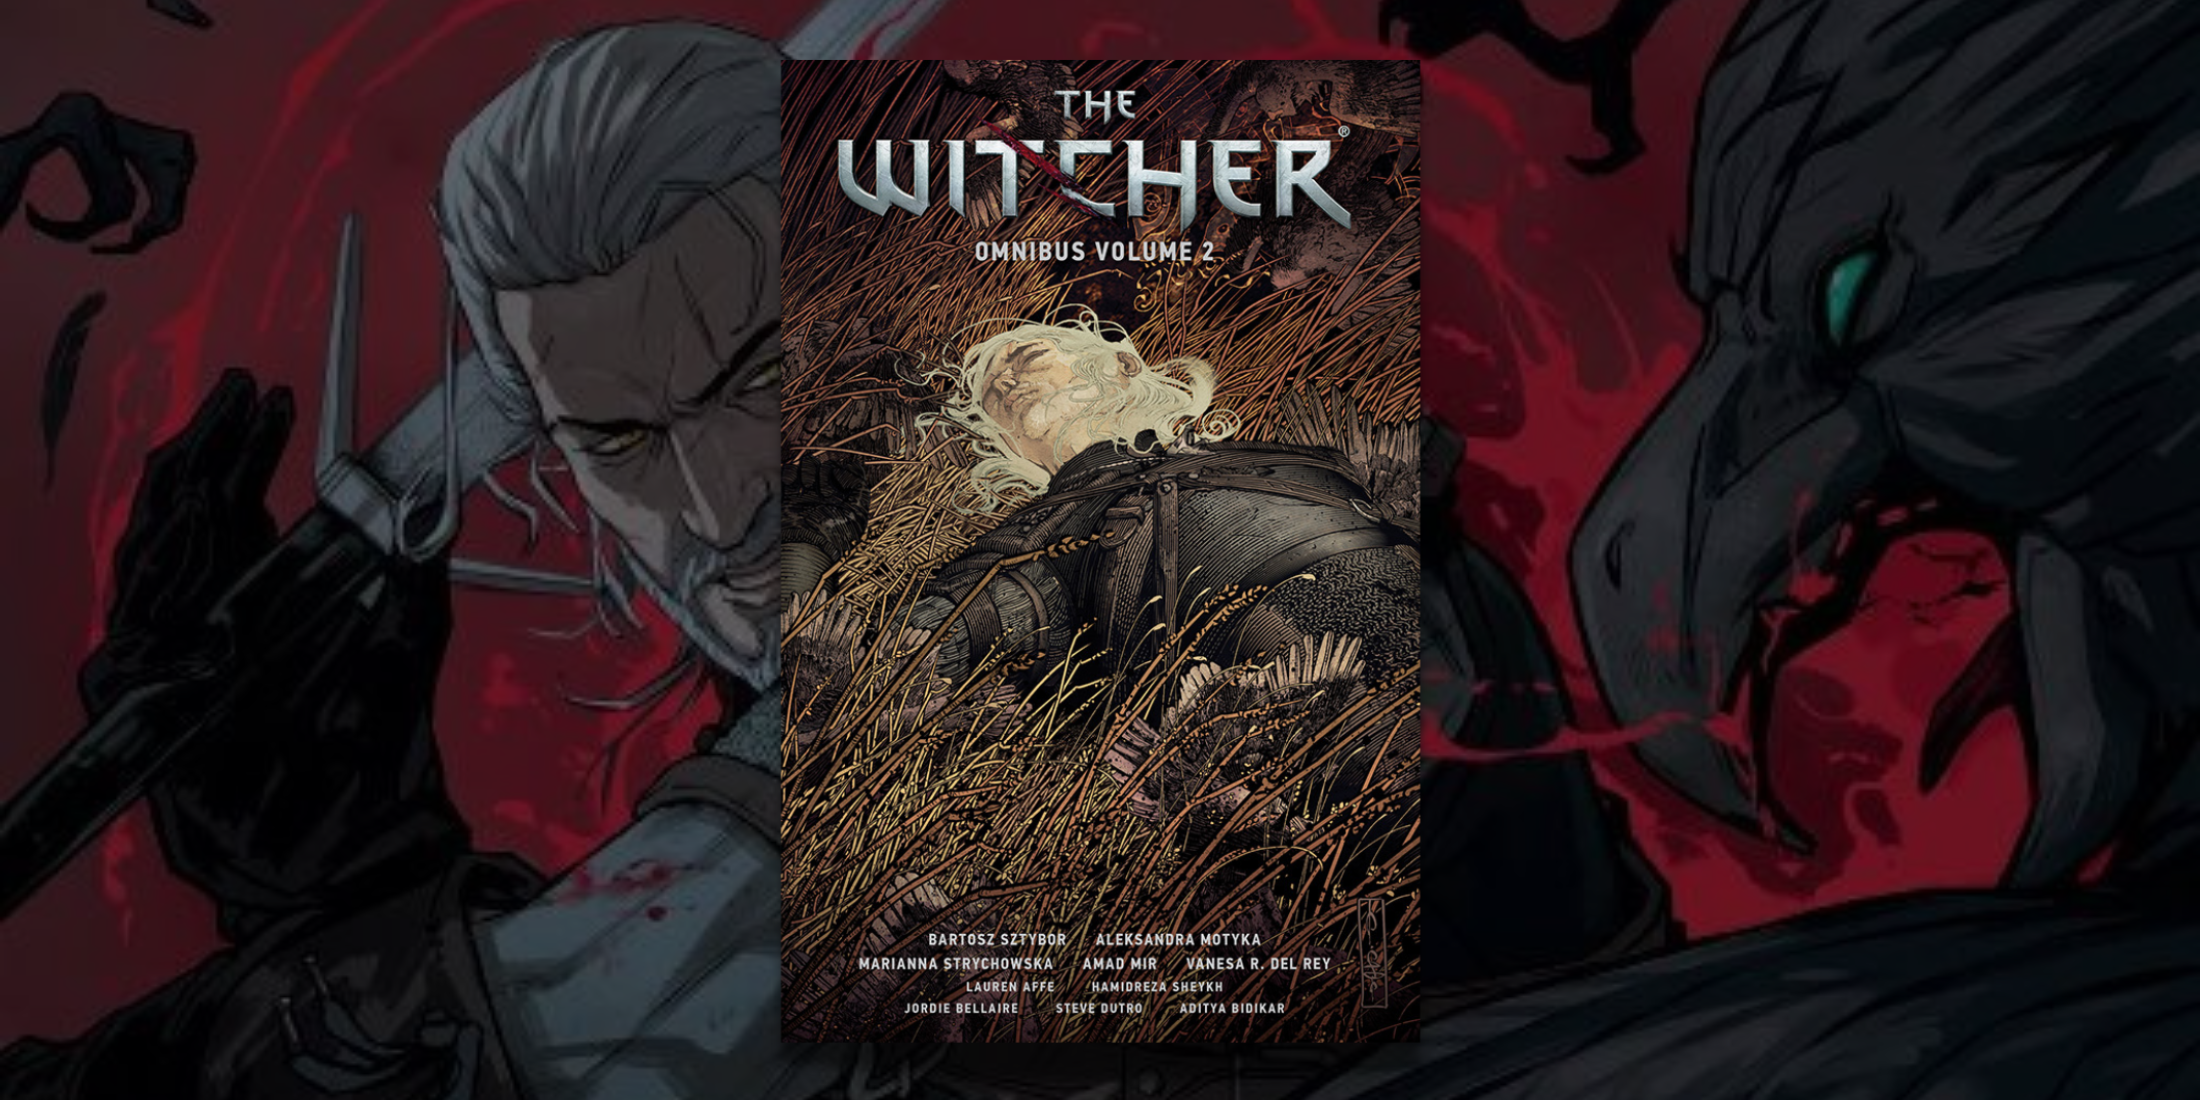 The Witcher Omnibus Volume 2: Geralt Returns with More Adventures in Second Collection of Stories